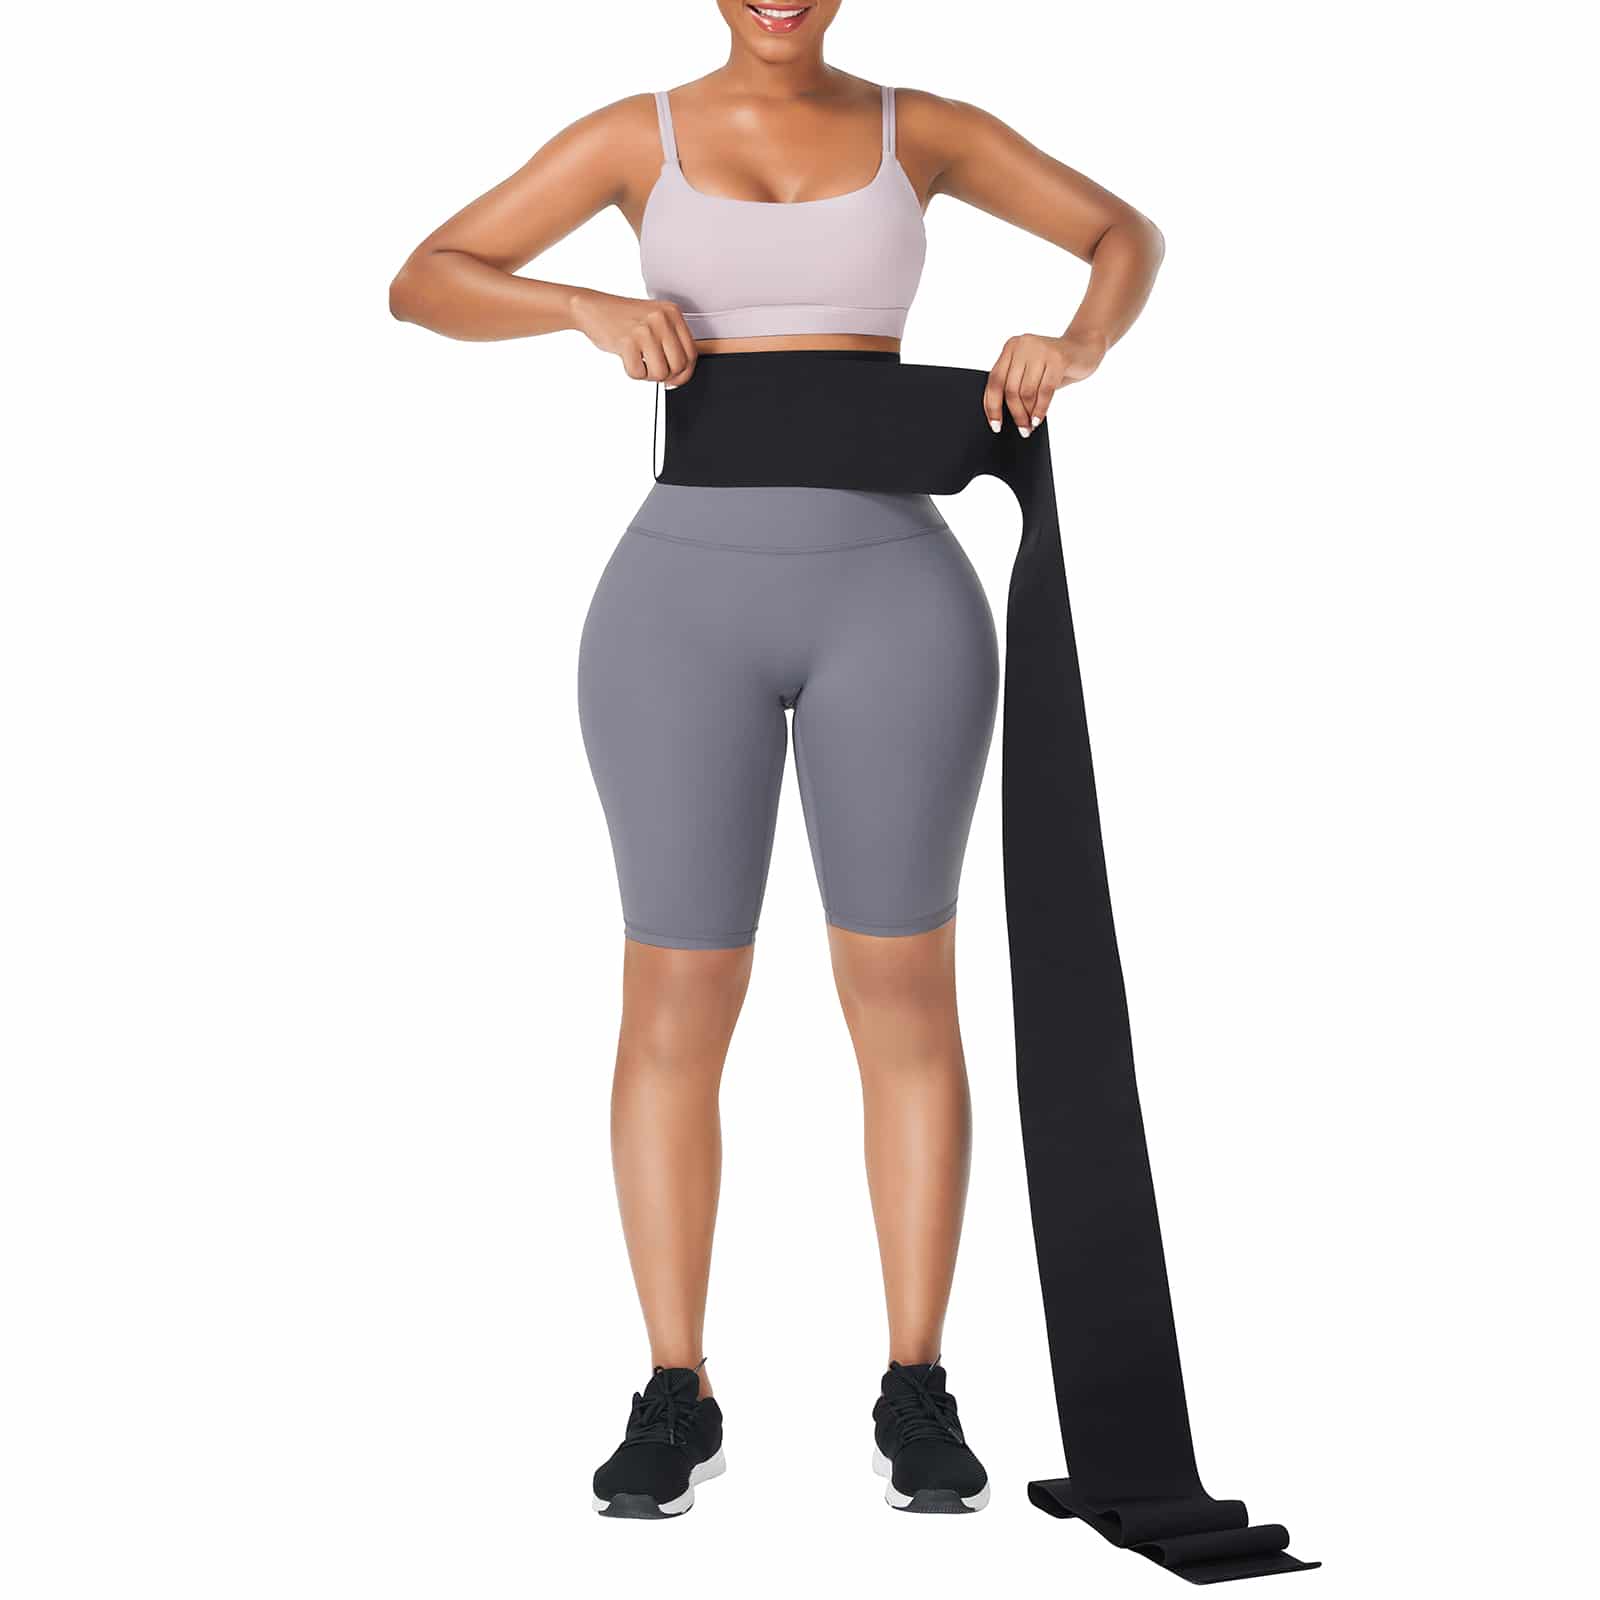 Does Sleeping with a Waist Trainer Help Lose Weight? - SportCoaching